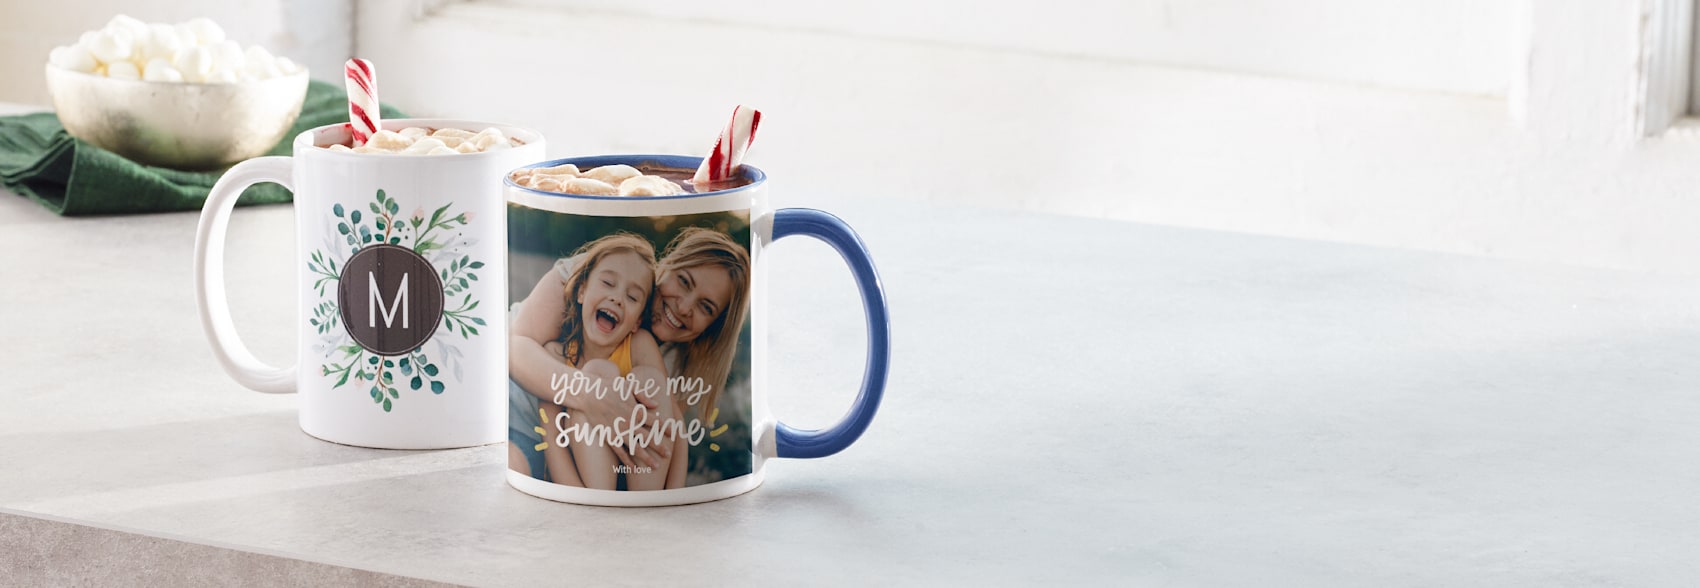 Larger version: personalized mugs with photo